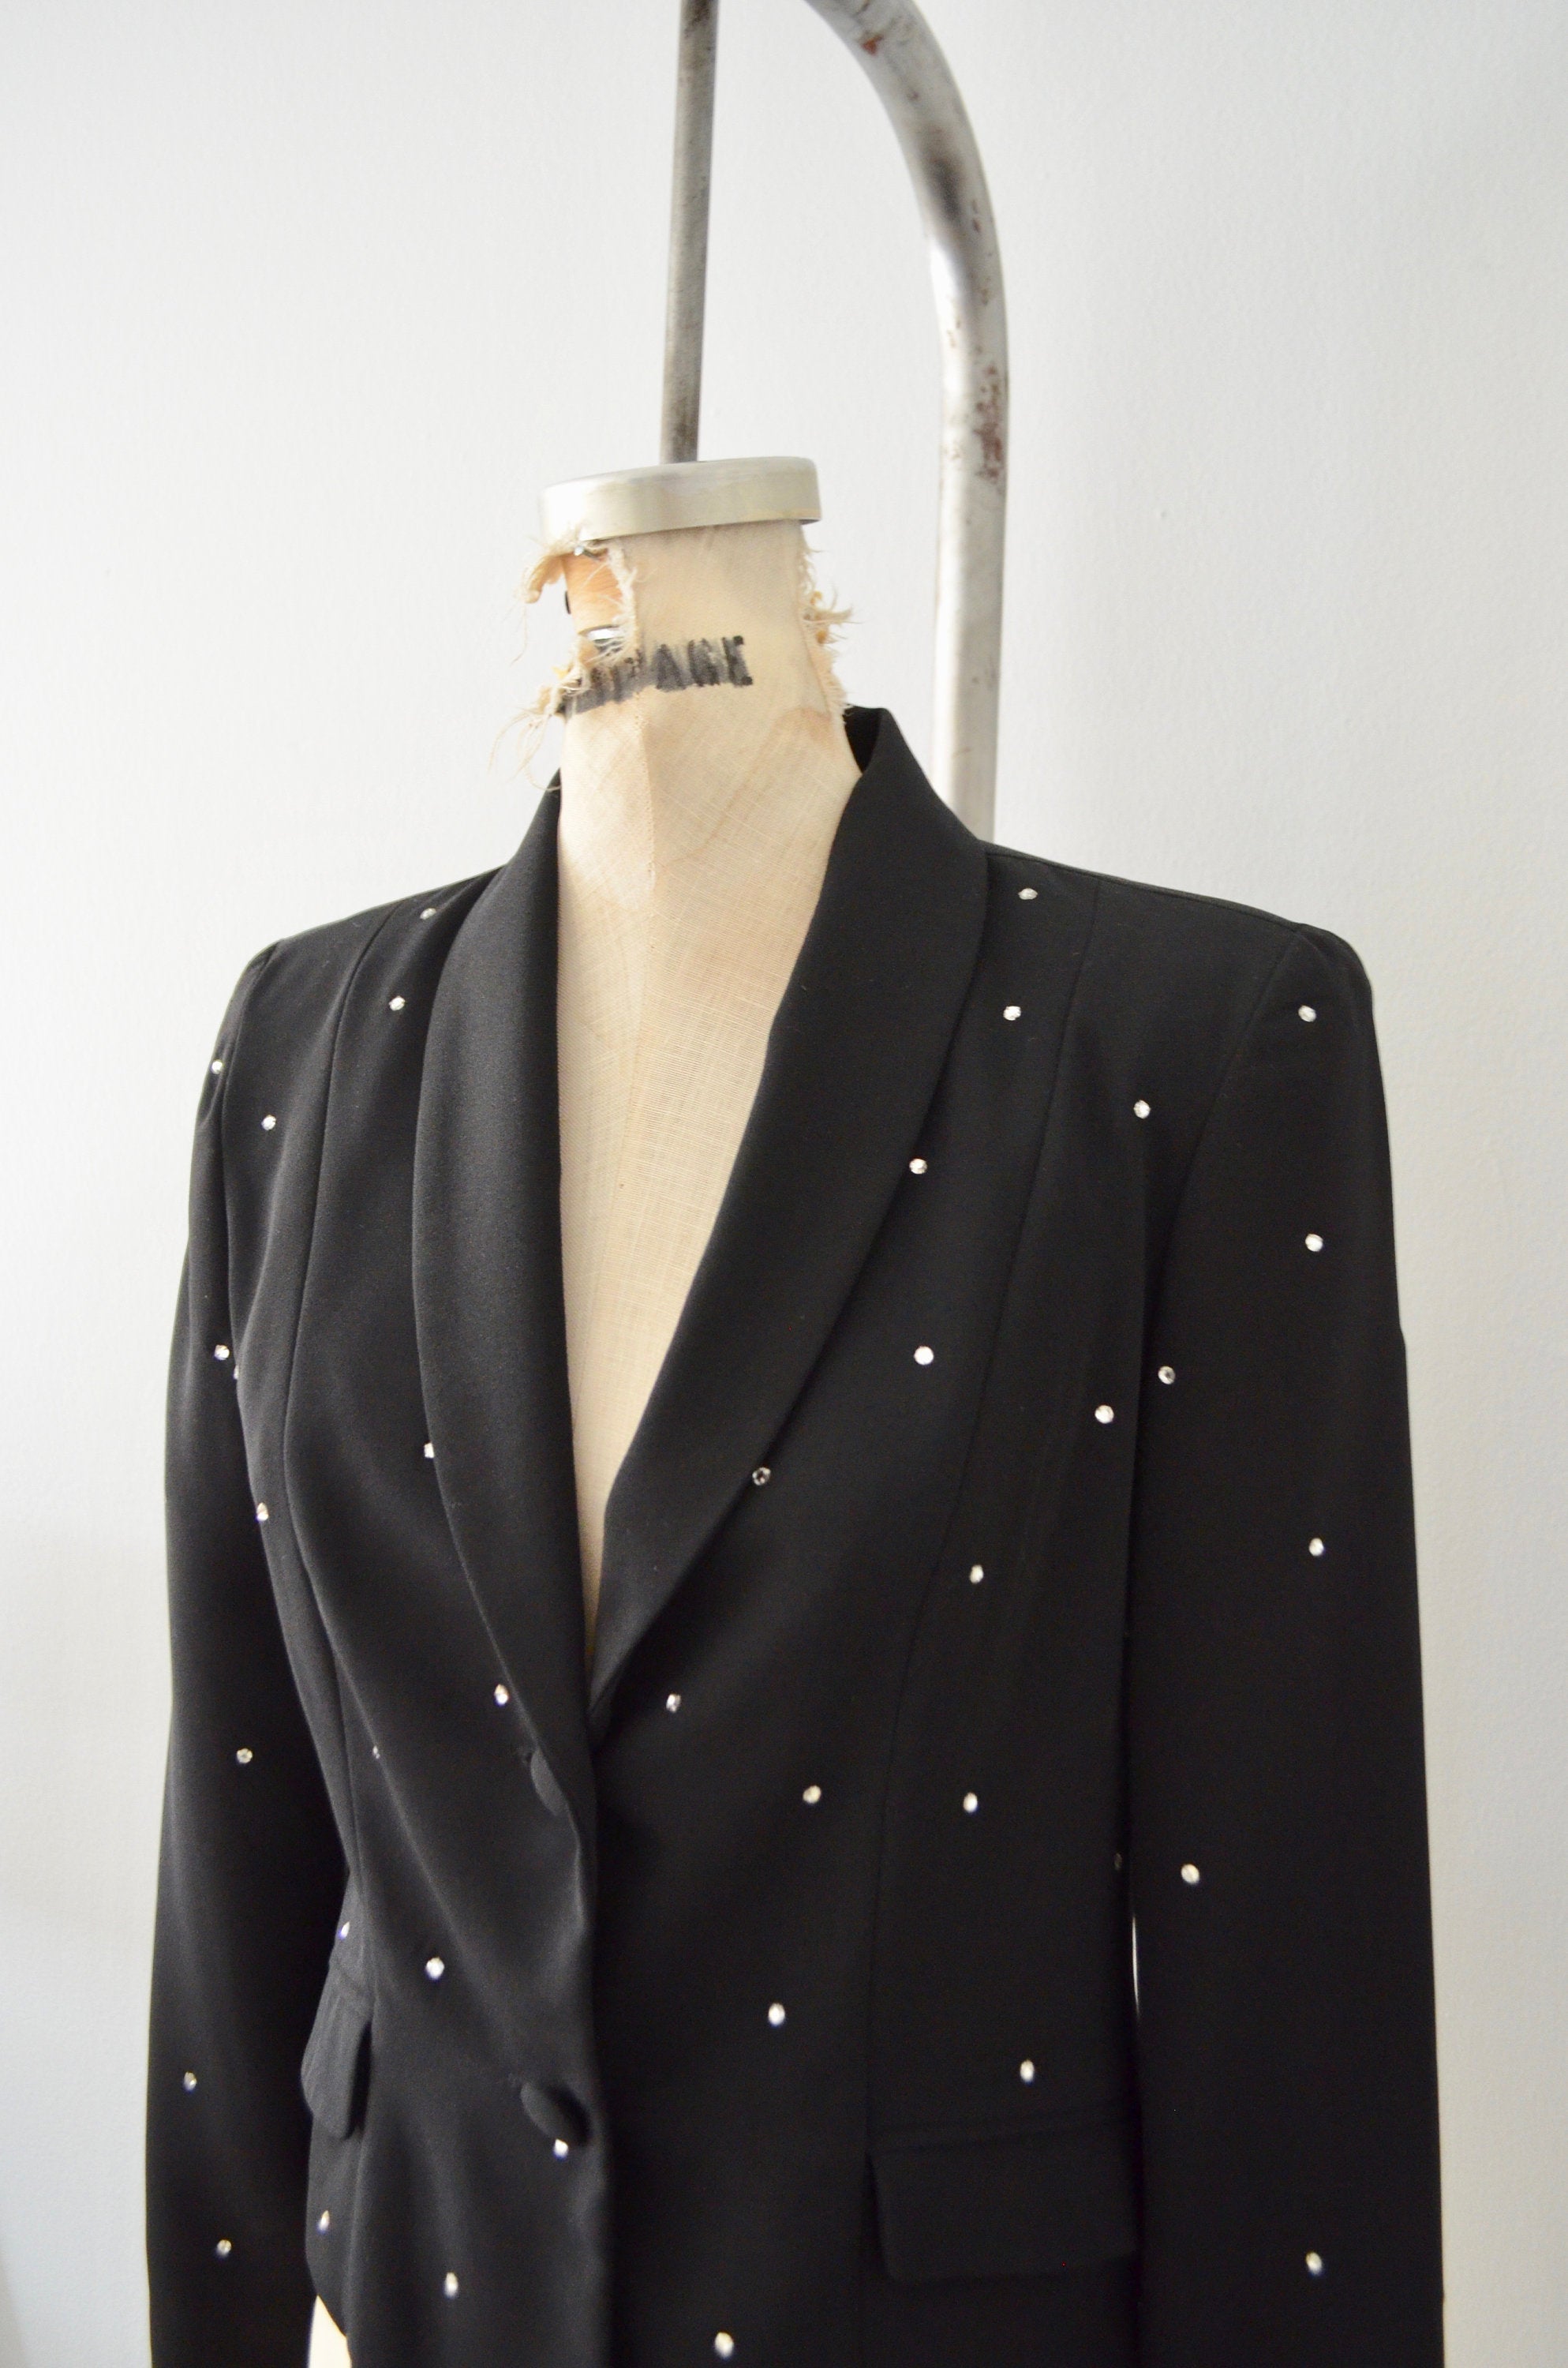 Shoulder Pads Black Tailored Blazer Bedazzled Crystal Embellishment Fall Style Russel Kemp